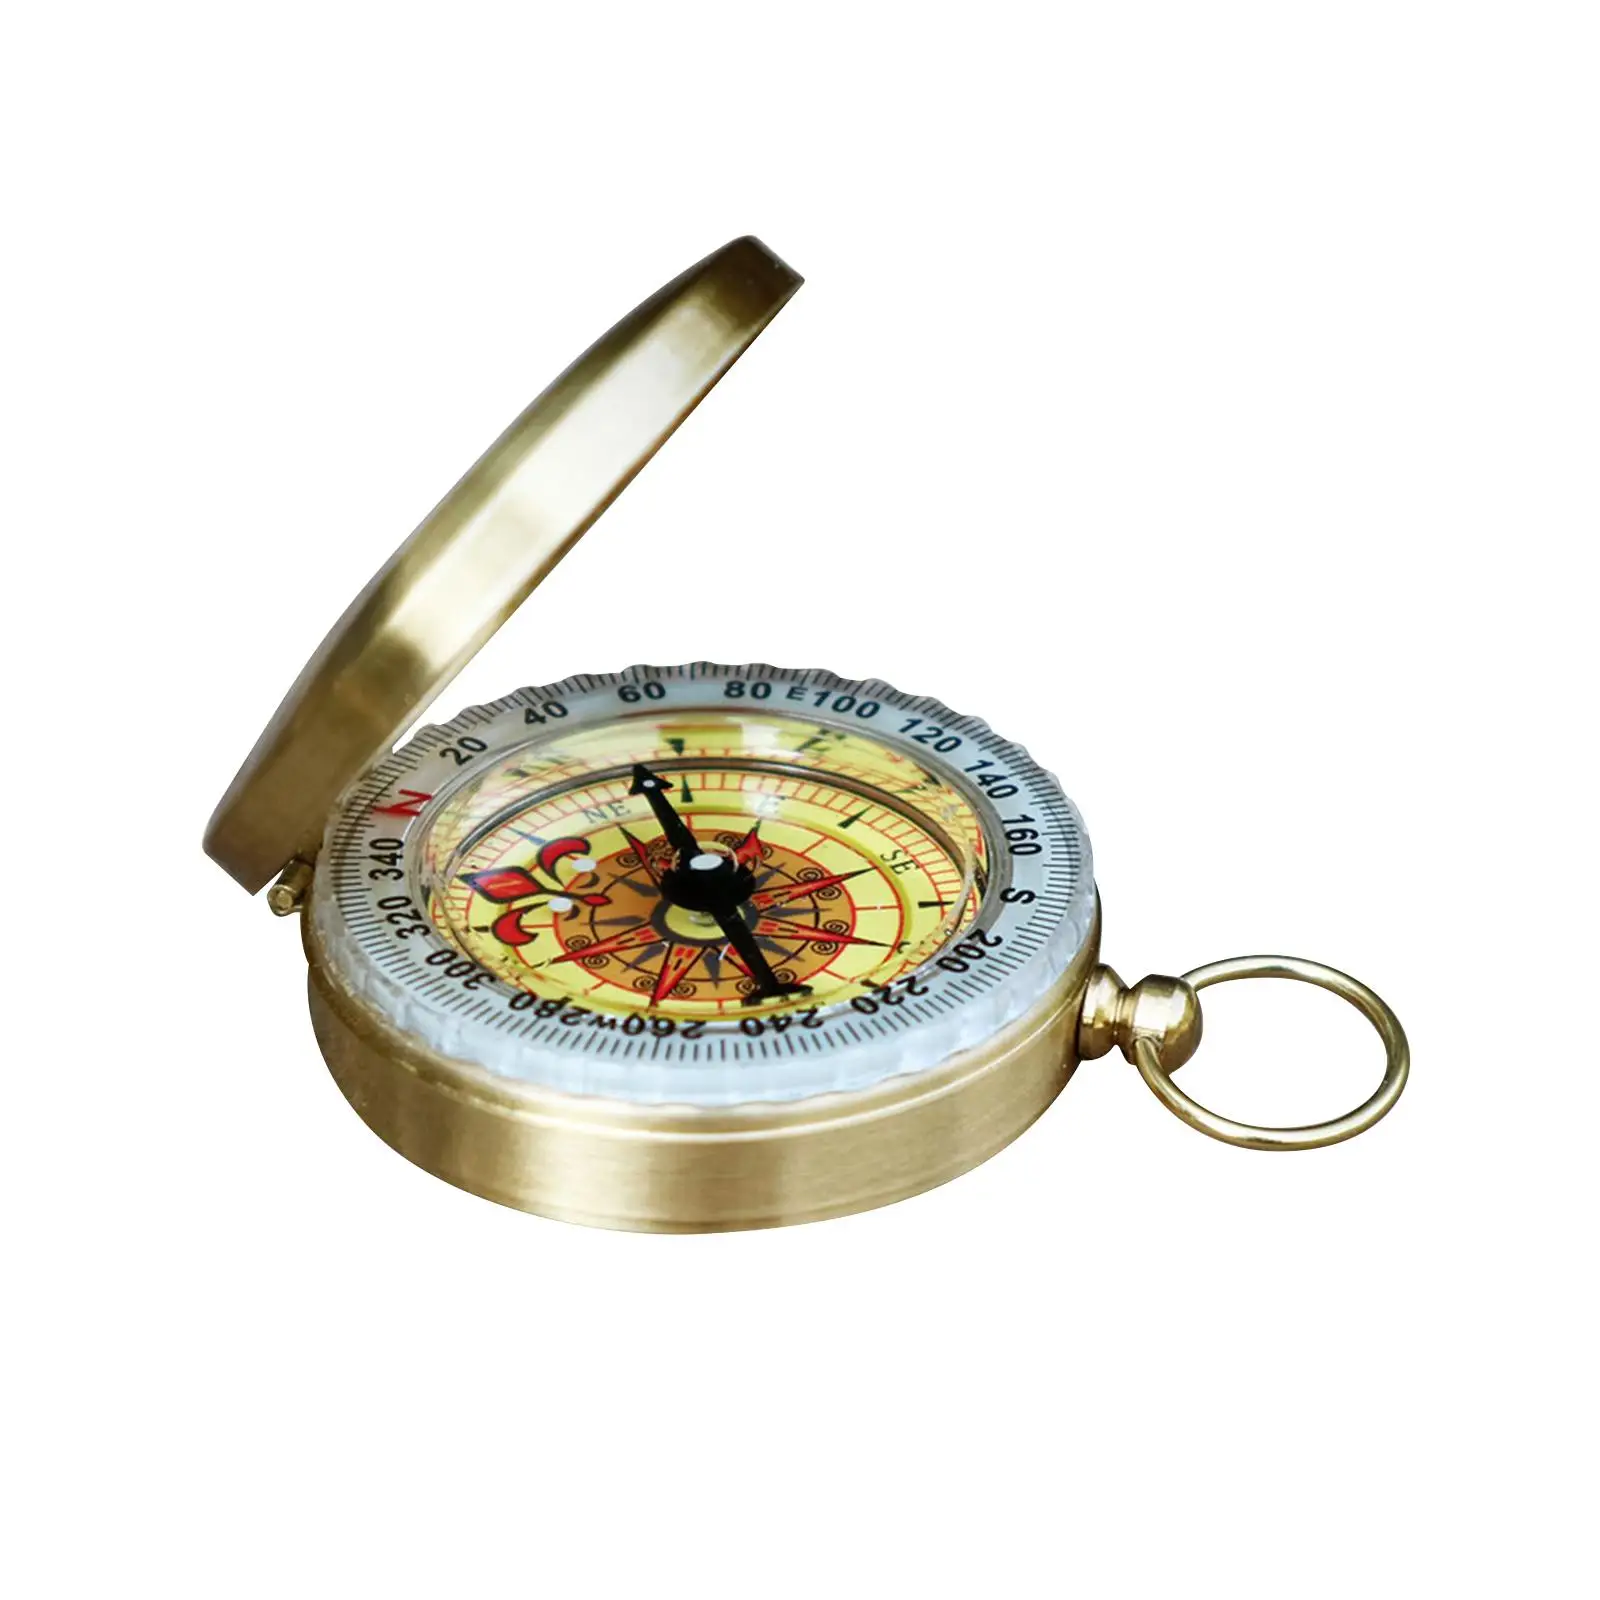 Camping Survival Compass Survival Gear Waterproof Small Pocket Compass Luminous Compass for Climbing Backpacking Outdoor Camping